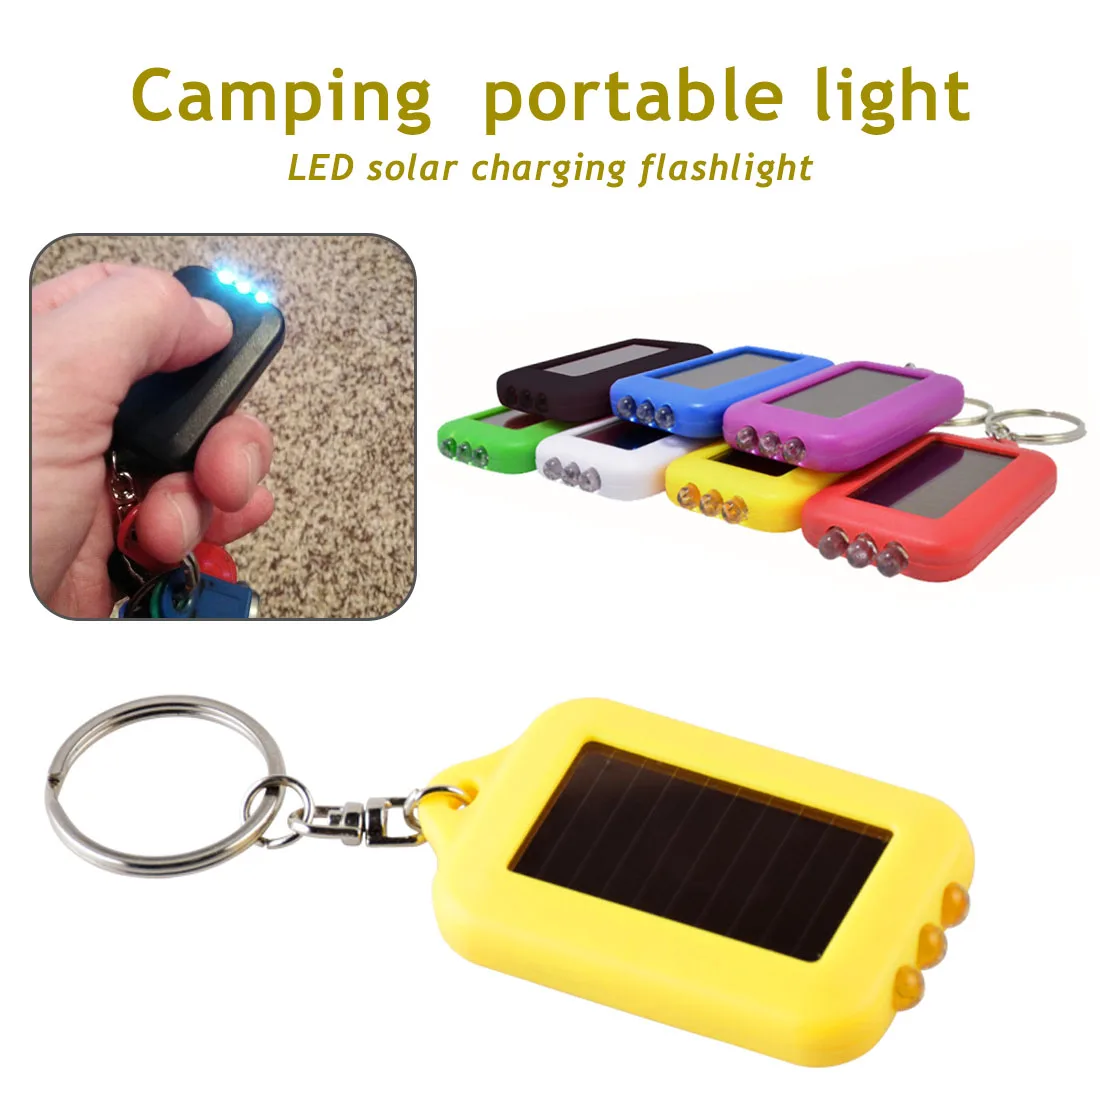 

3 Leds Solar Panel Sun Power Energy Torch Camping Light Portable Key Chain Hiking Rechargeable Spotlight Lamp camping equipment